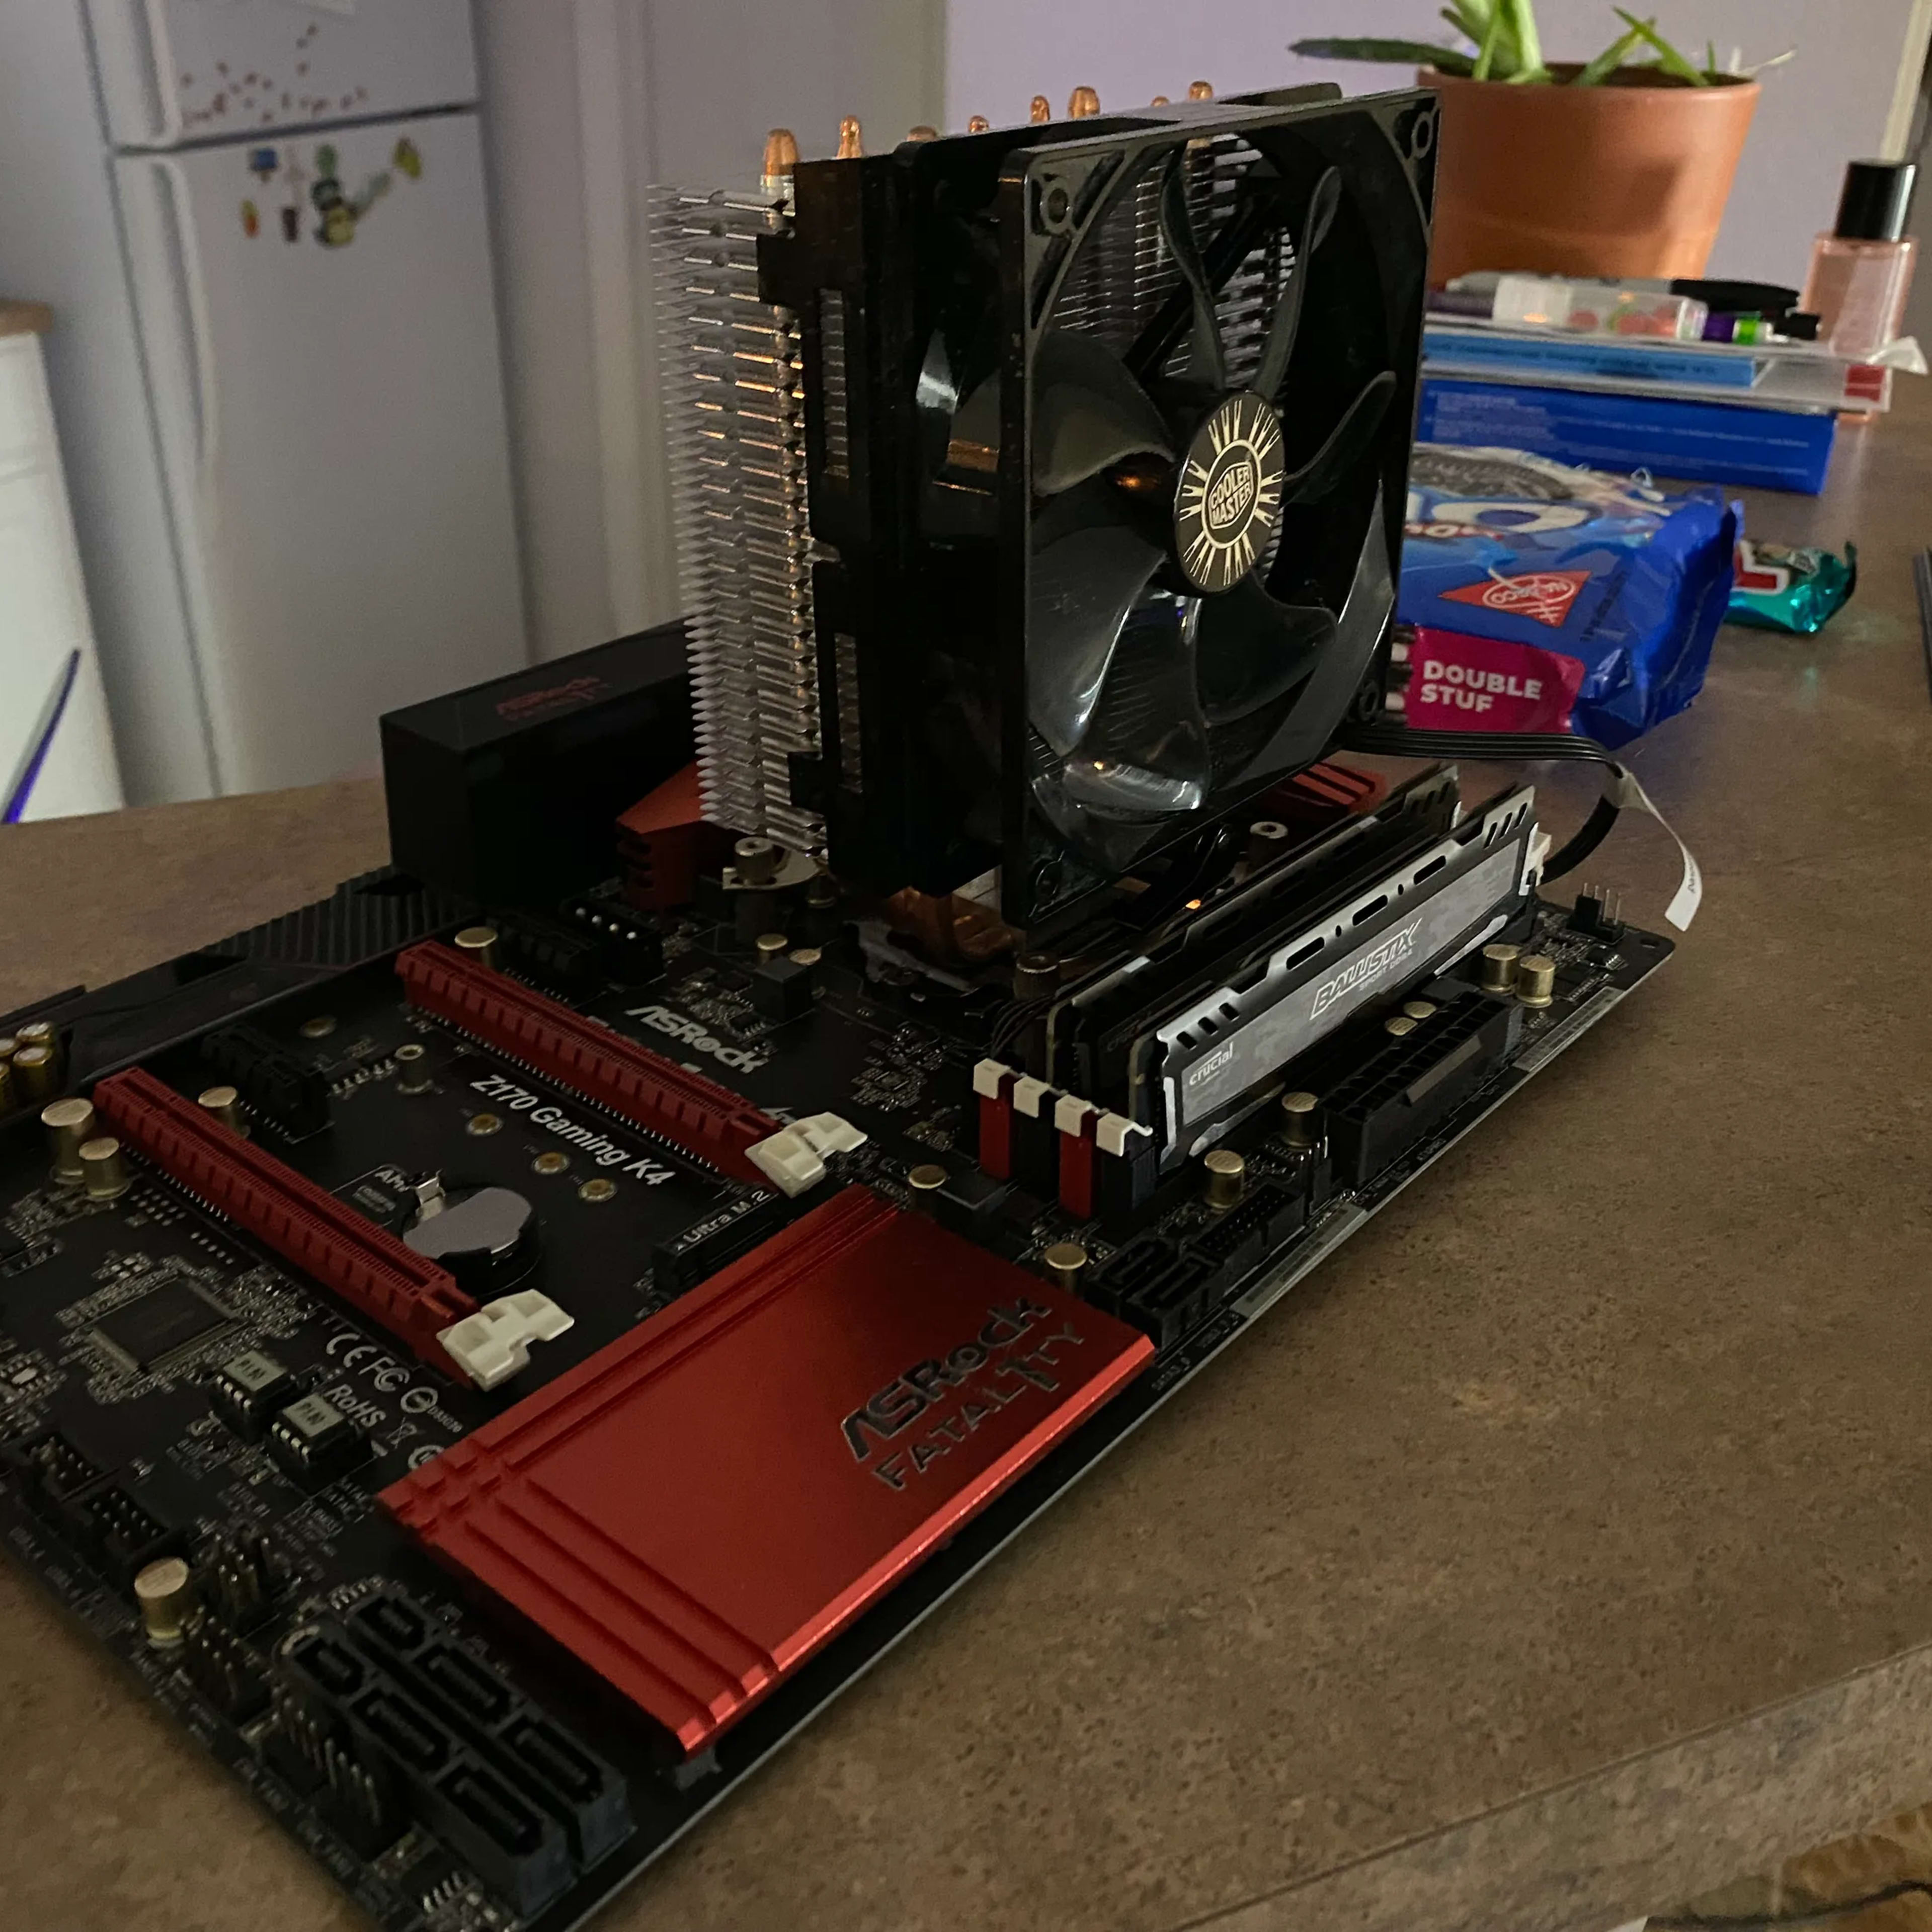 Intel Core i5 Skylake 6600K mounted in Asrock Fatal1ty Z170 Gaming K4 with cooler and Ram included